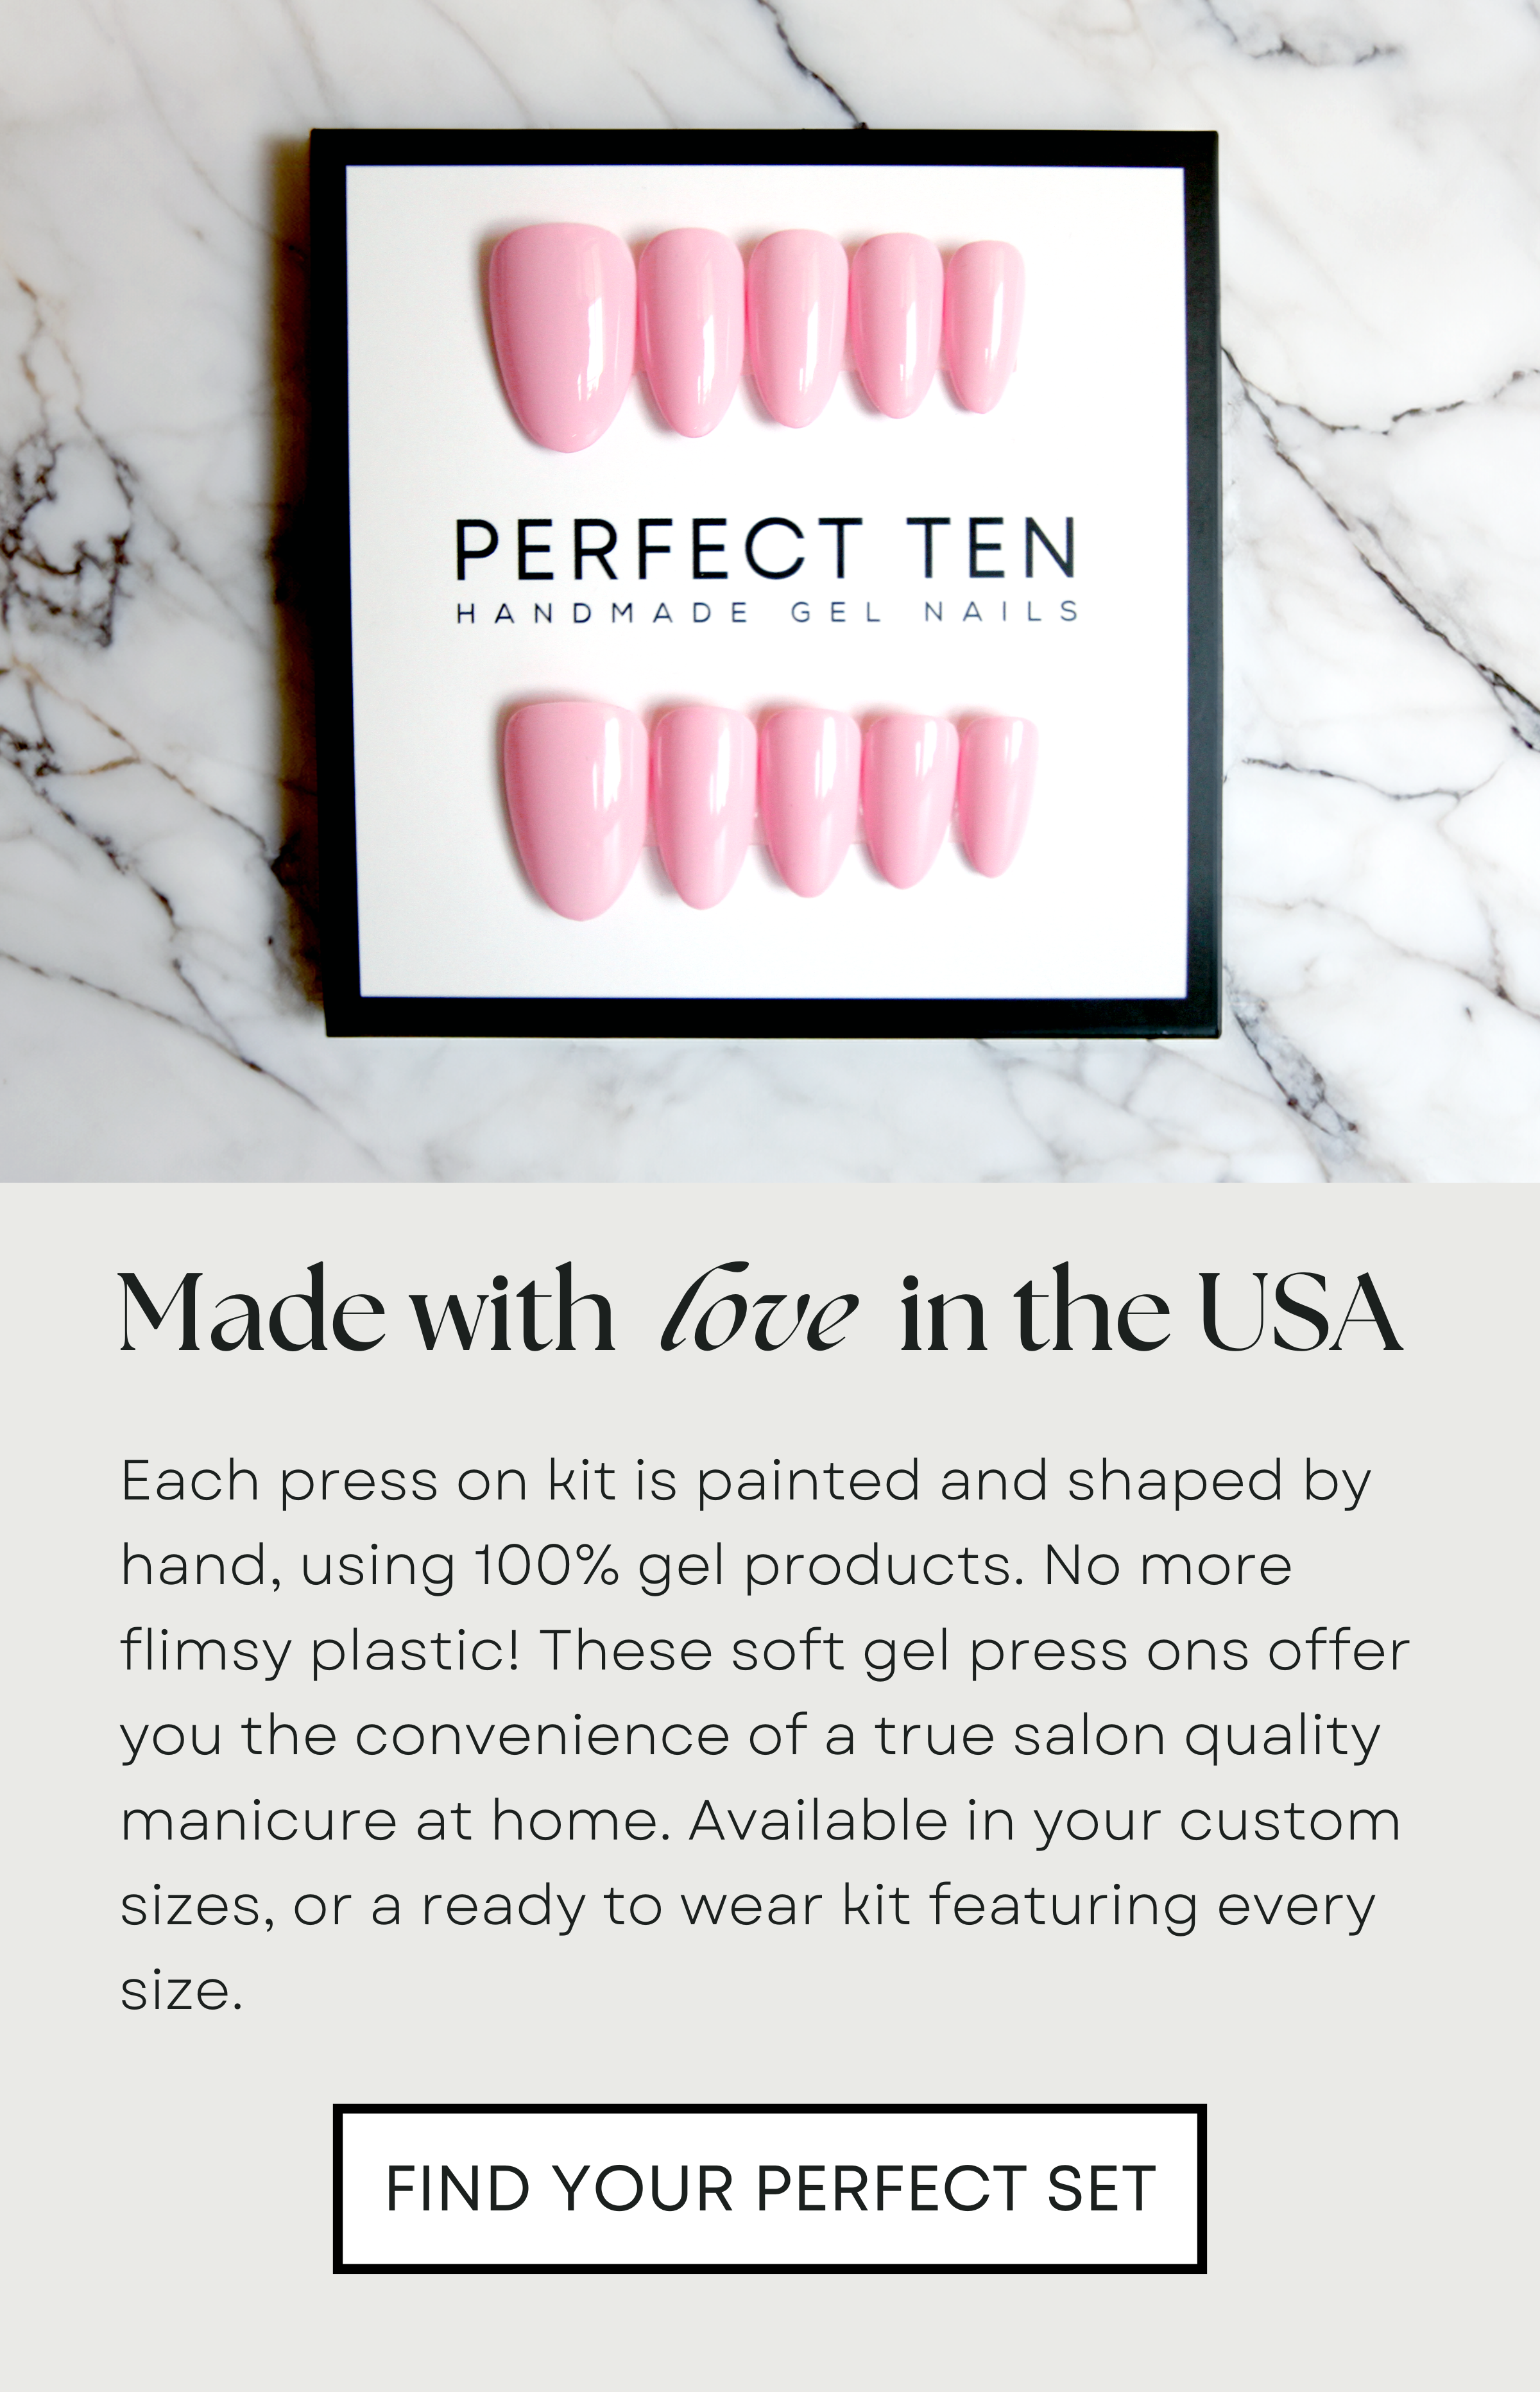 press on nails handmade in the USA, hand painted and sculpted with 100% gel products. A Gel X manicure at home.